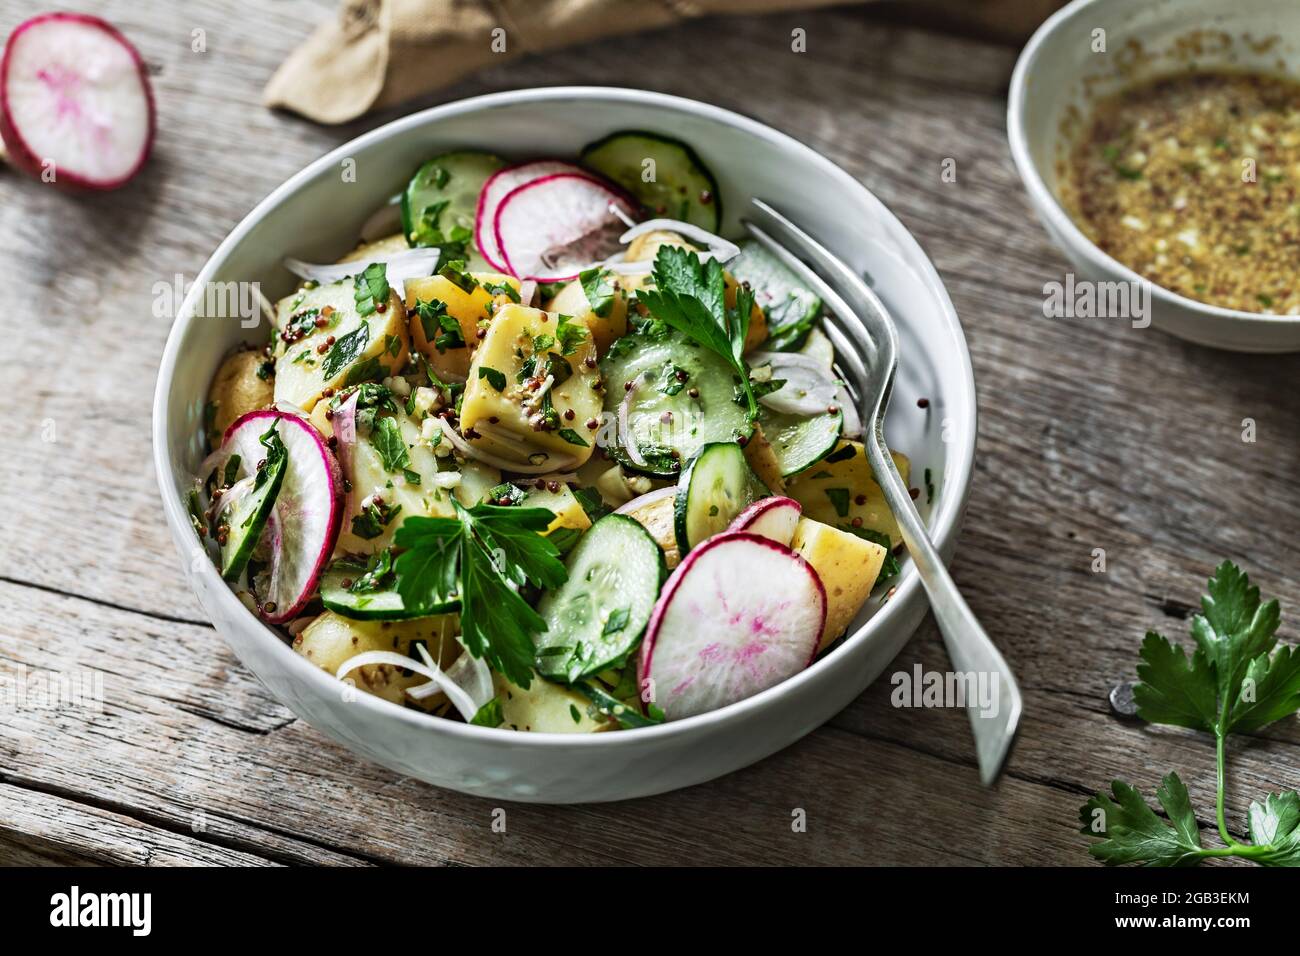 Potato with Cucumber Radish Salad in a wooden bowl Stock Photo